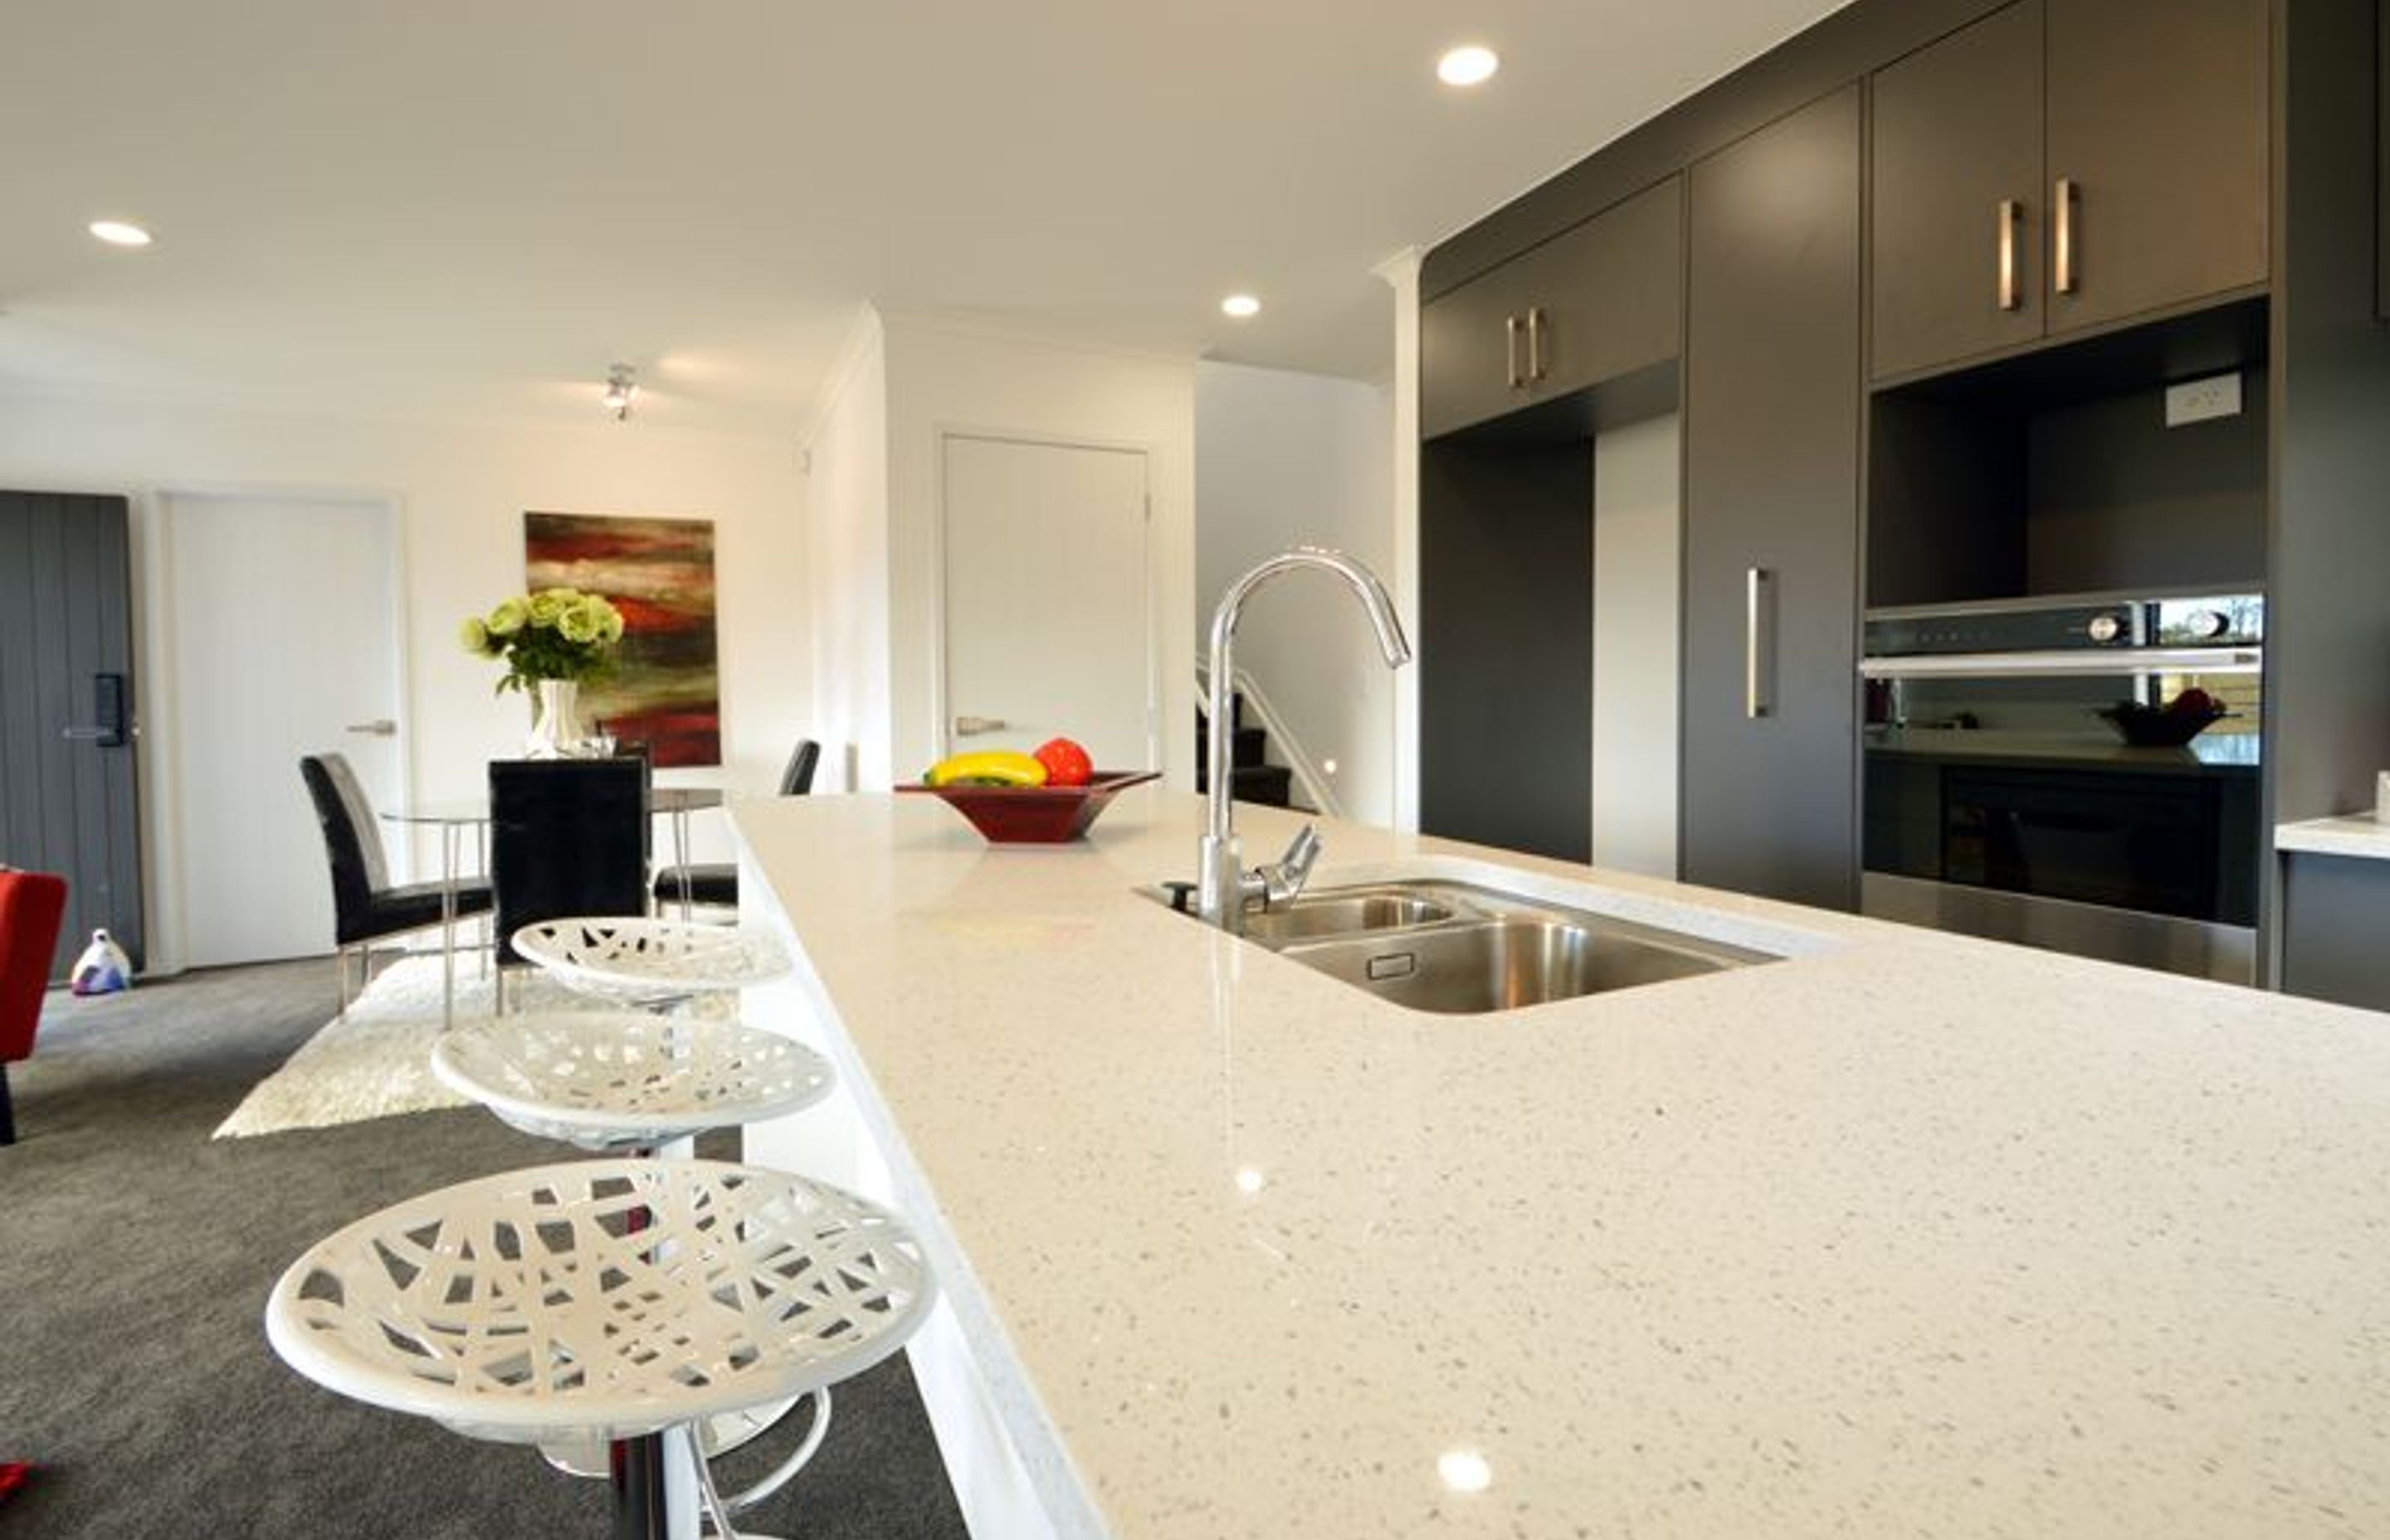 Kitchen - Modern user friendly kitchen with lots of light and breakfast bar for the family to enjoy